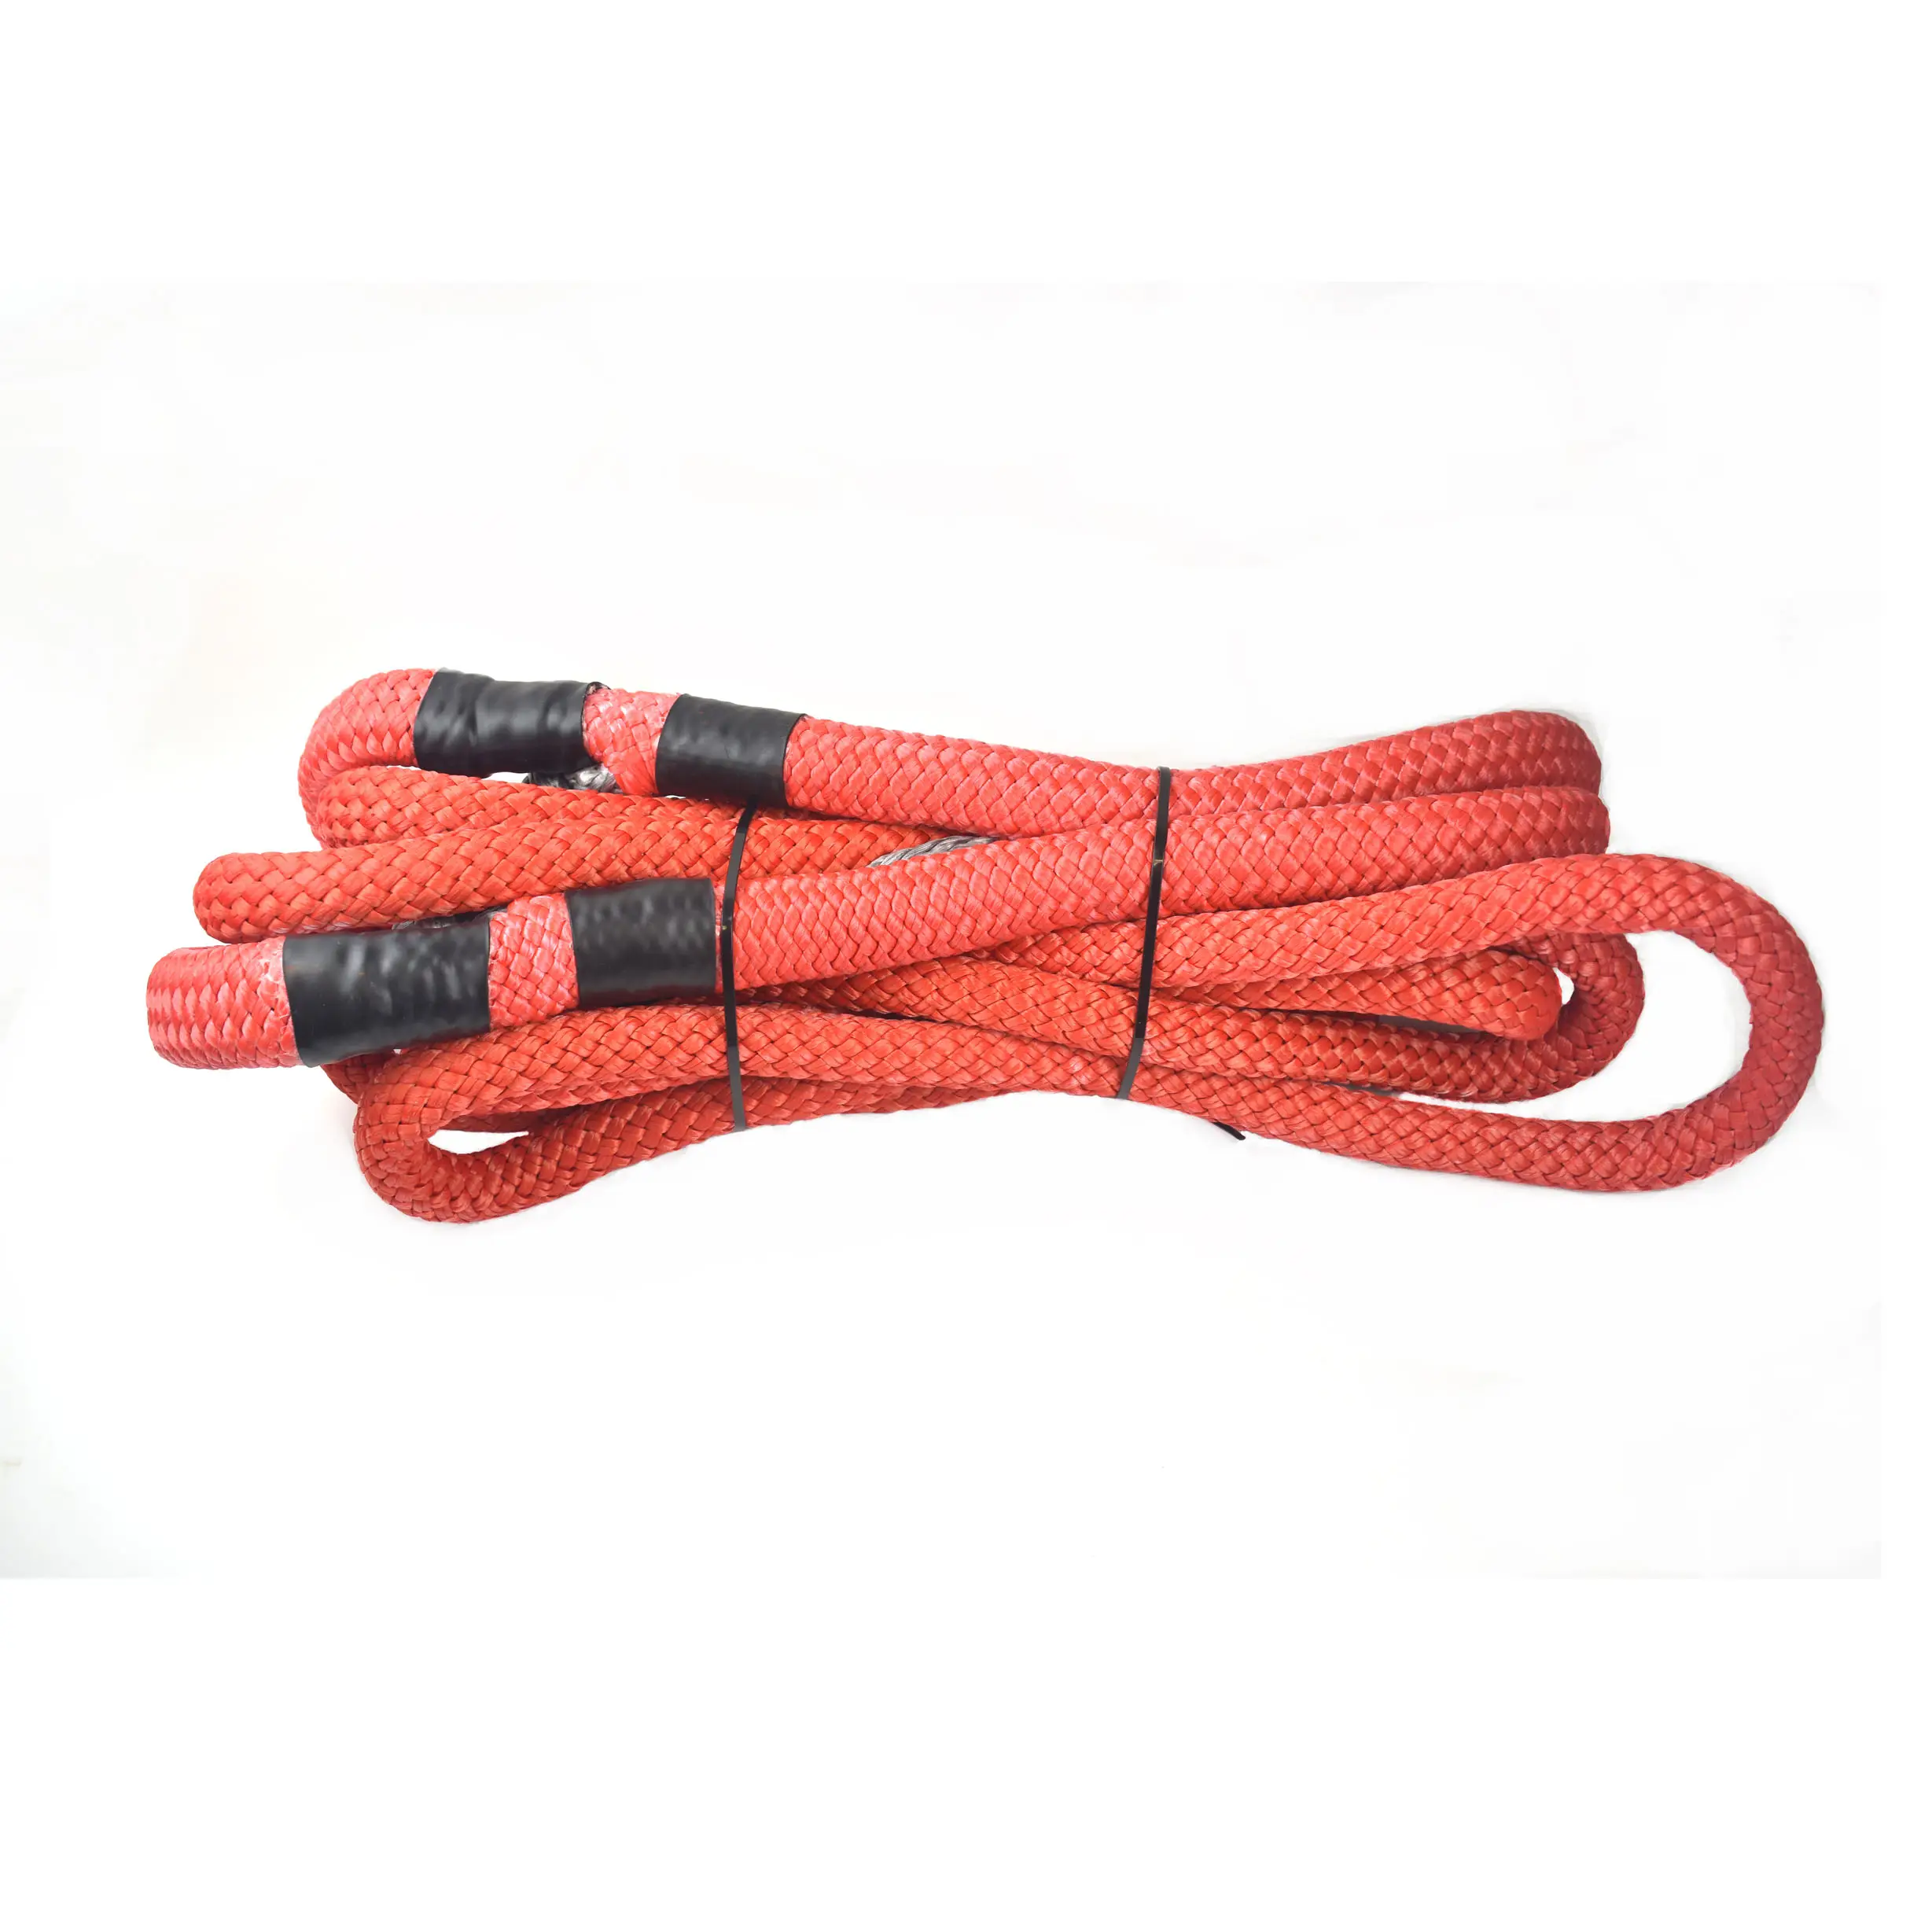 Open Eye Recovery Rope 1 1/2 inch Rated at 78000lbs Soft Shackle Rope